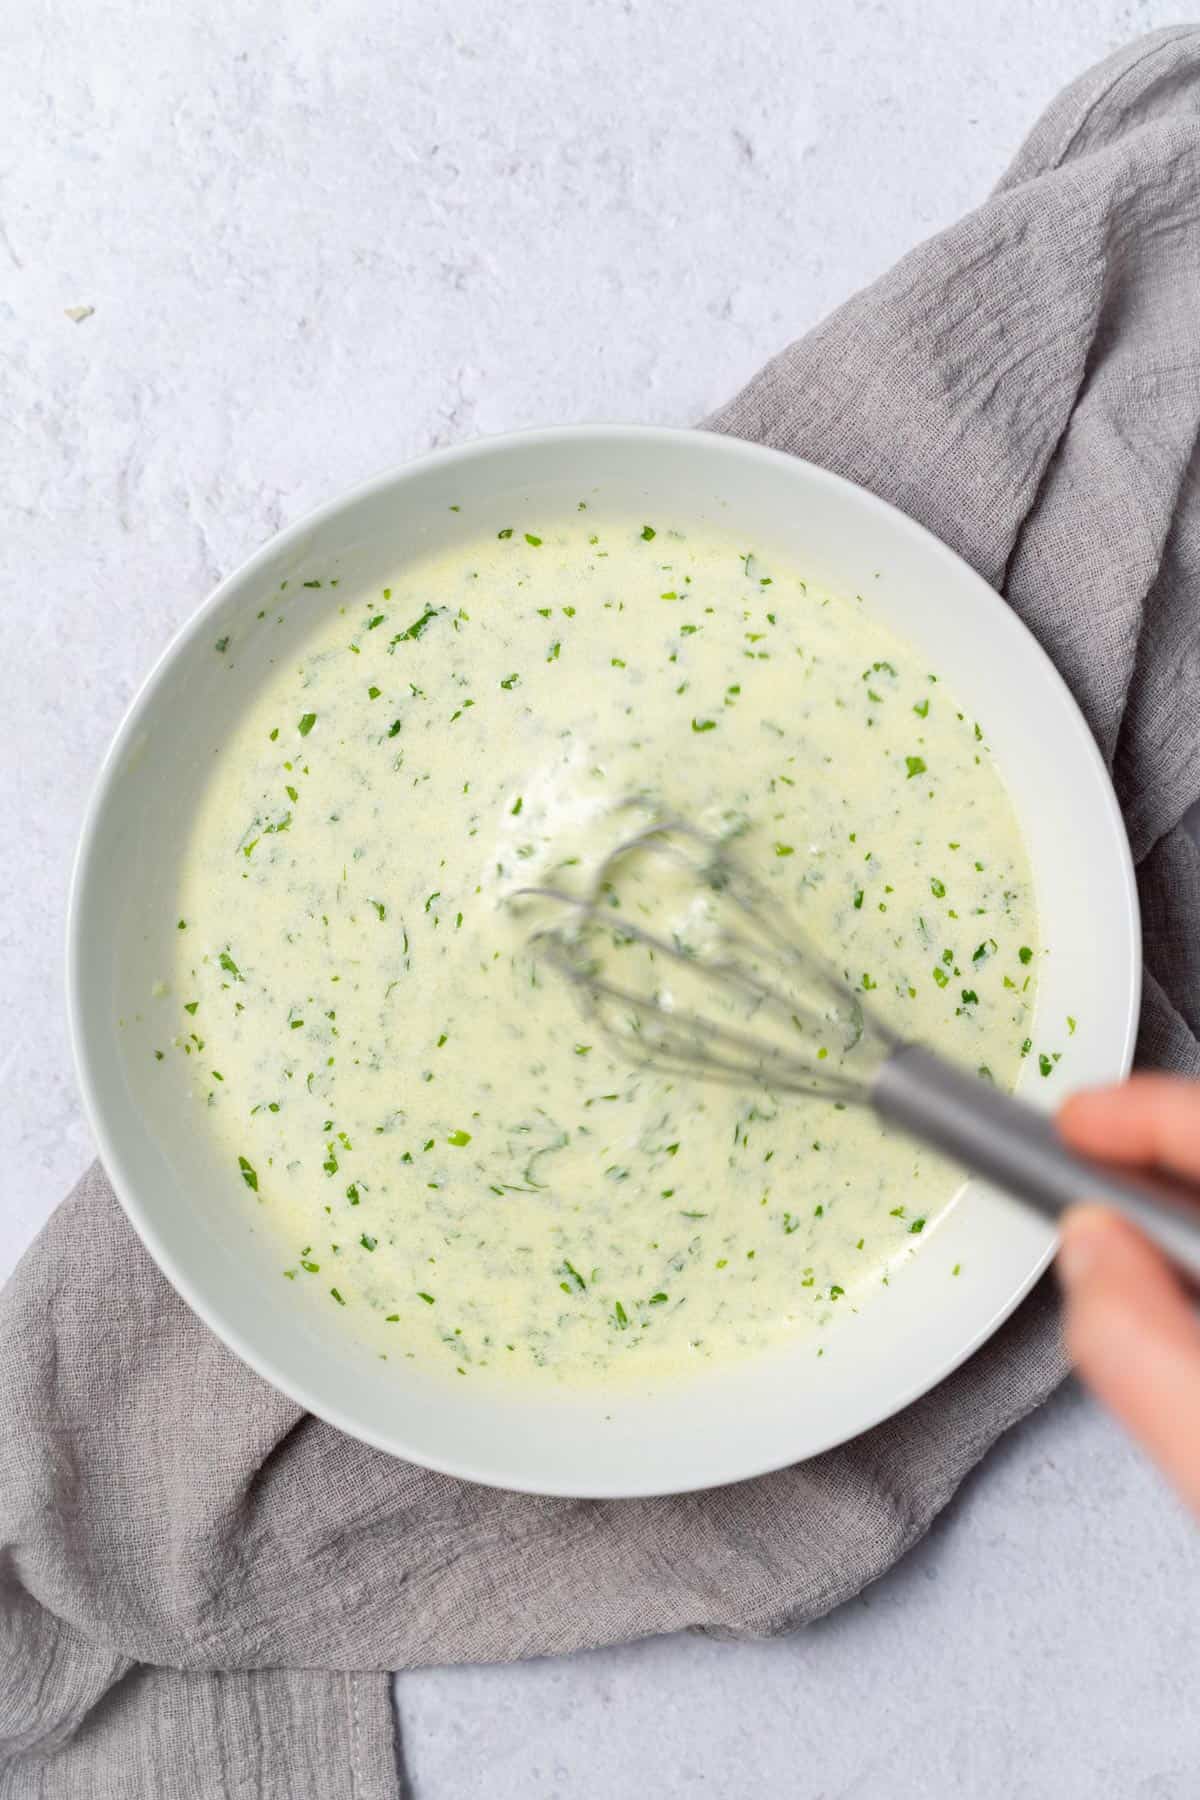 Whisking a creamy dressing in a white bowl.